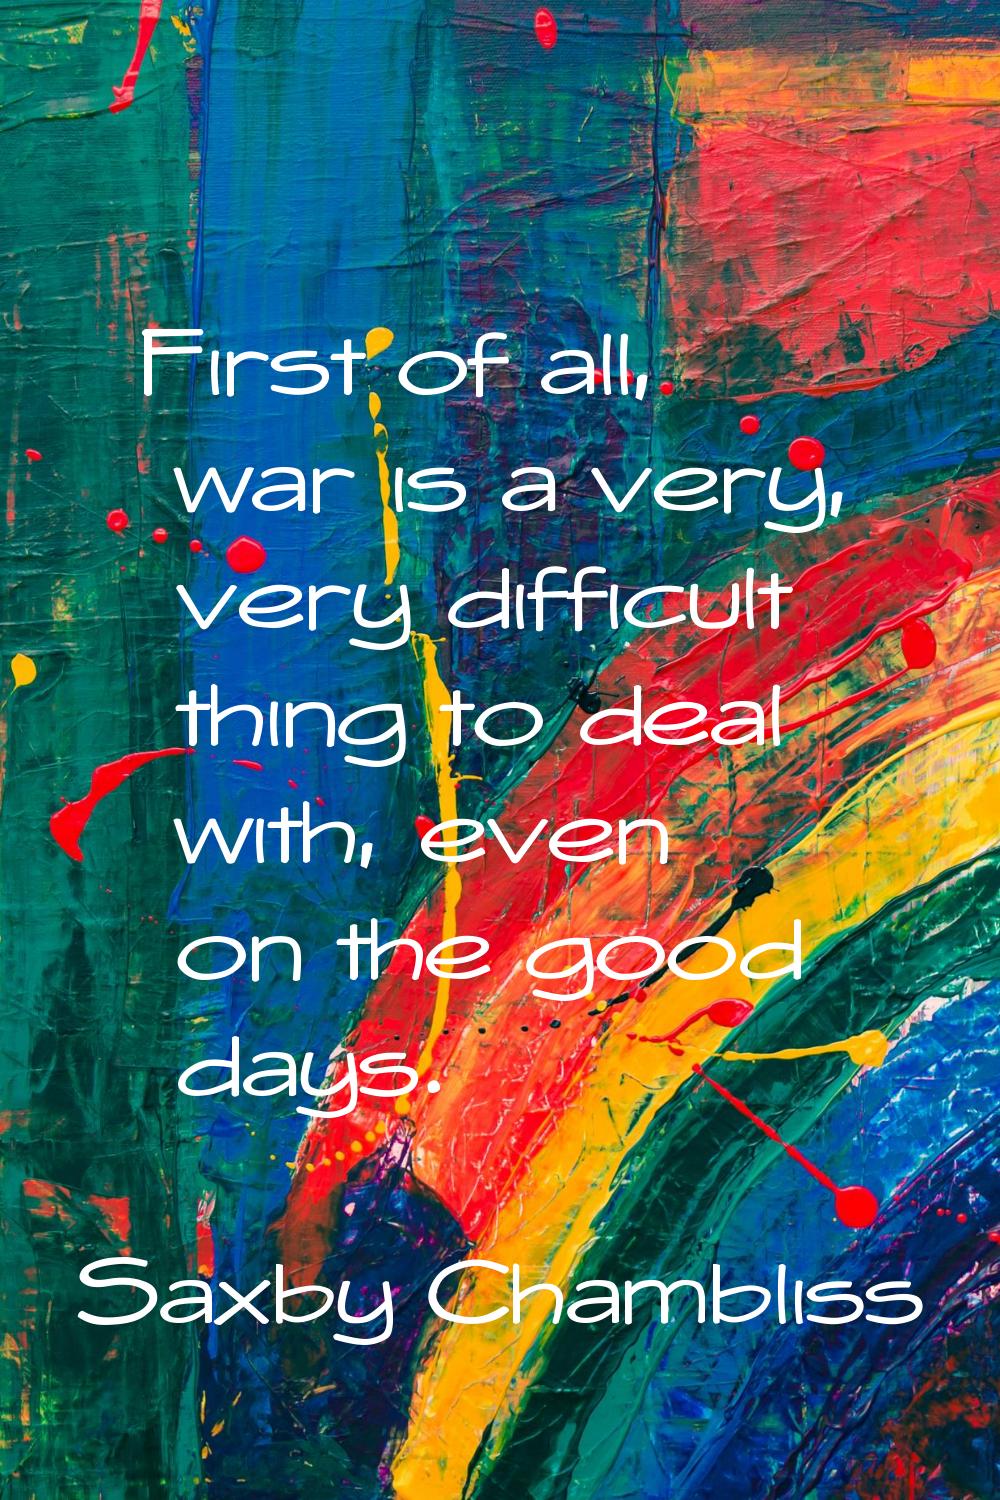 First of all, war is a very, very difficult thing to deal with, even on the good days.